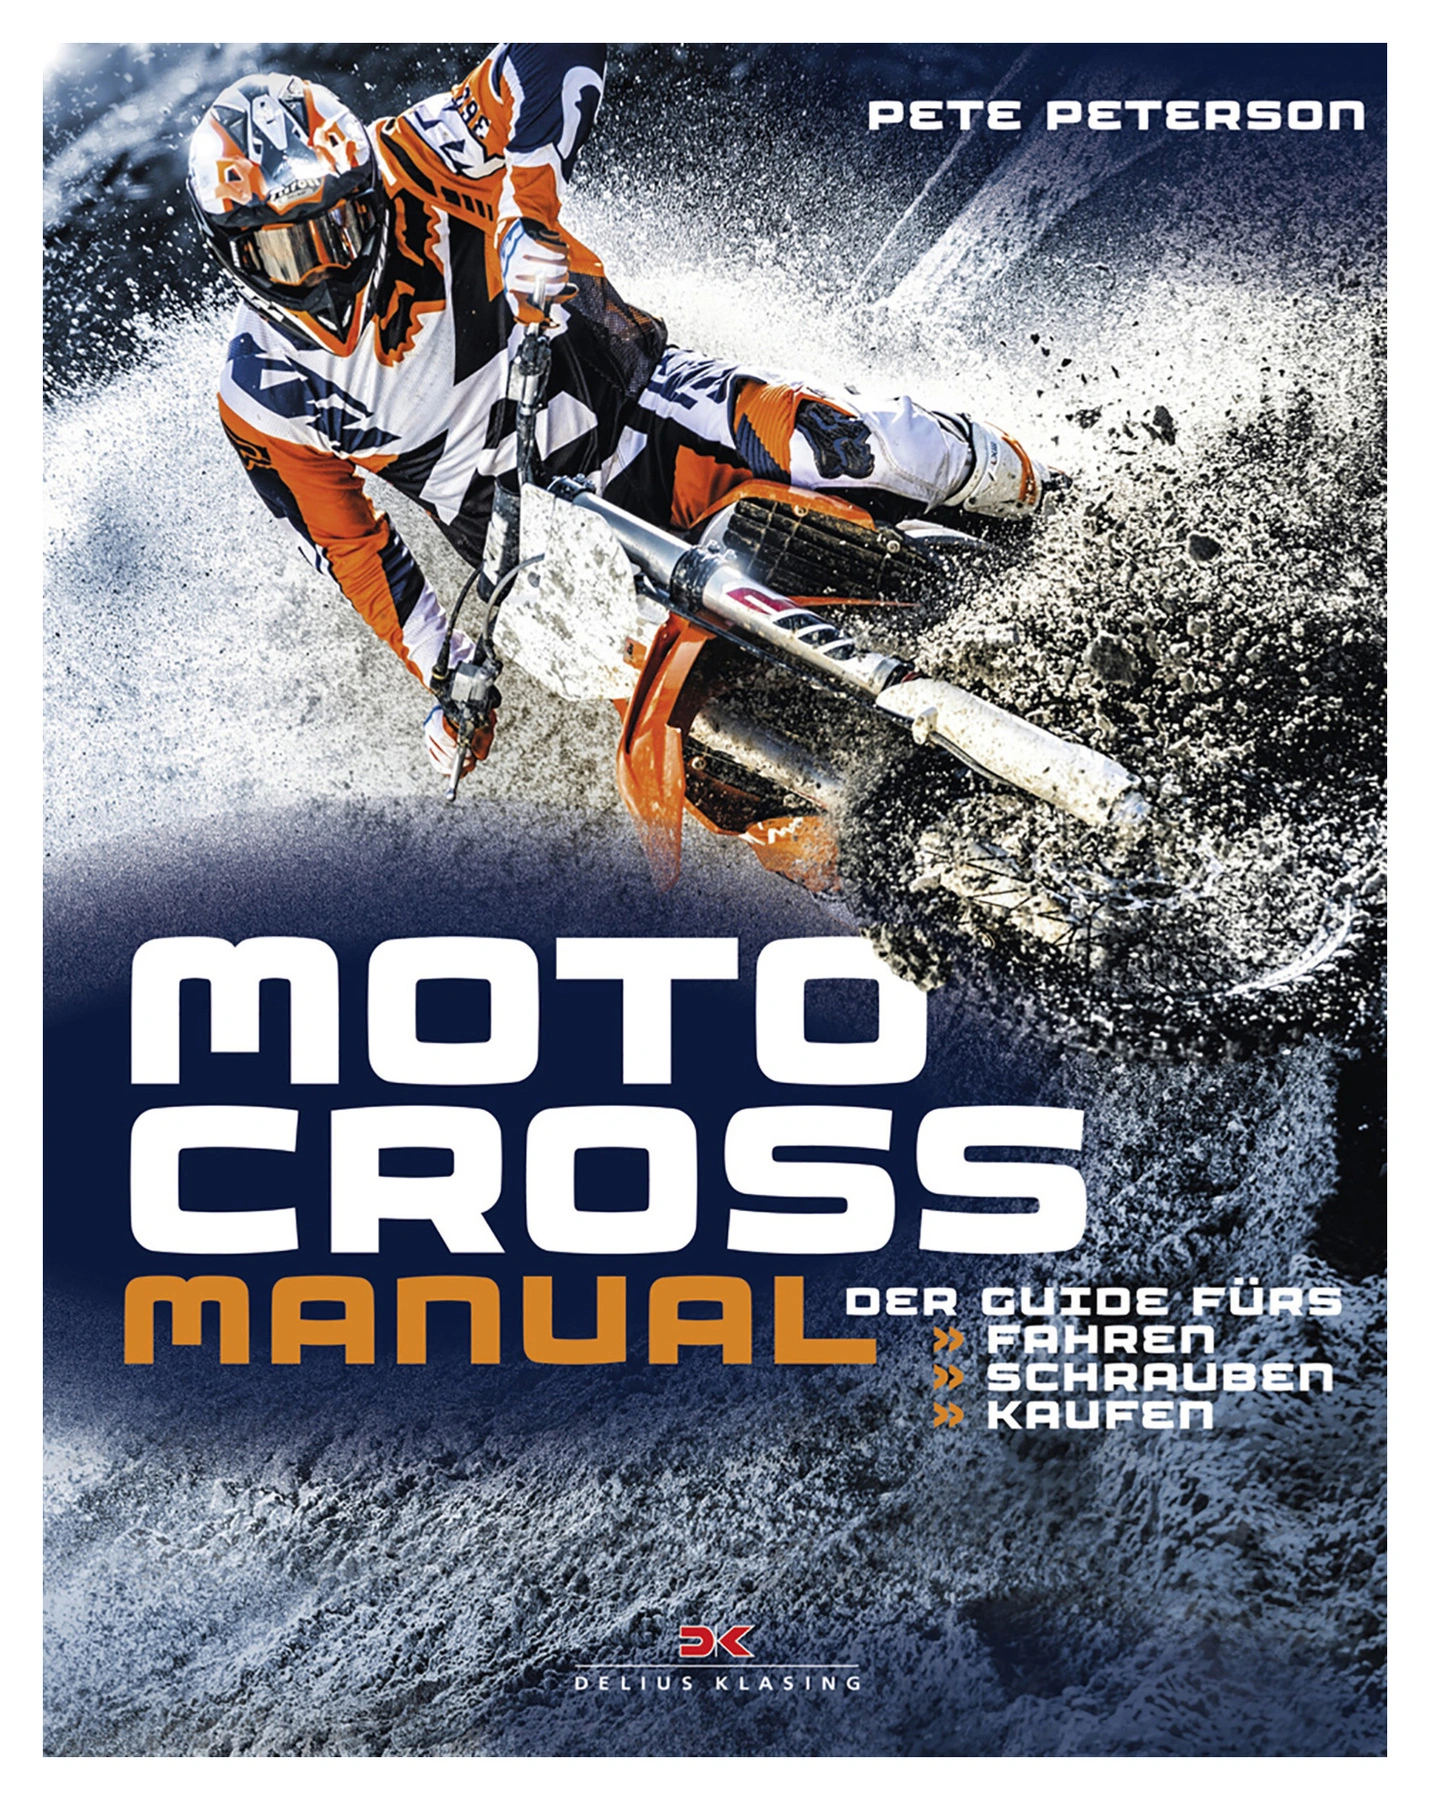 MANUALE MOTOCROSS 256PAG.